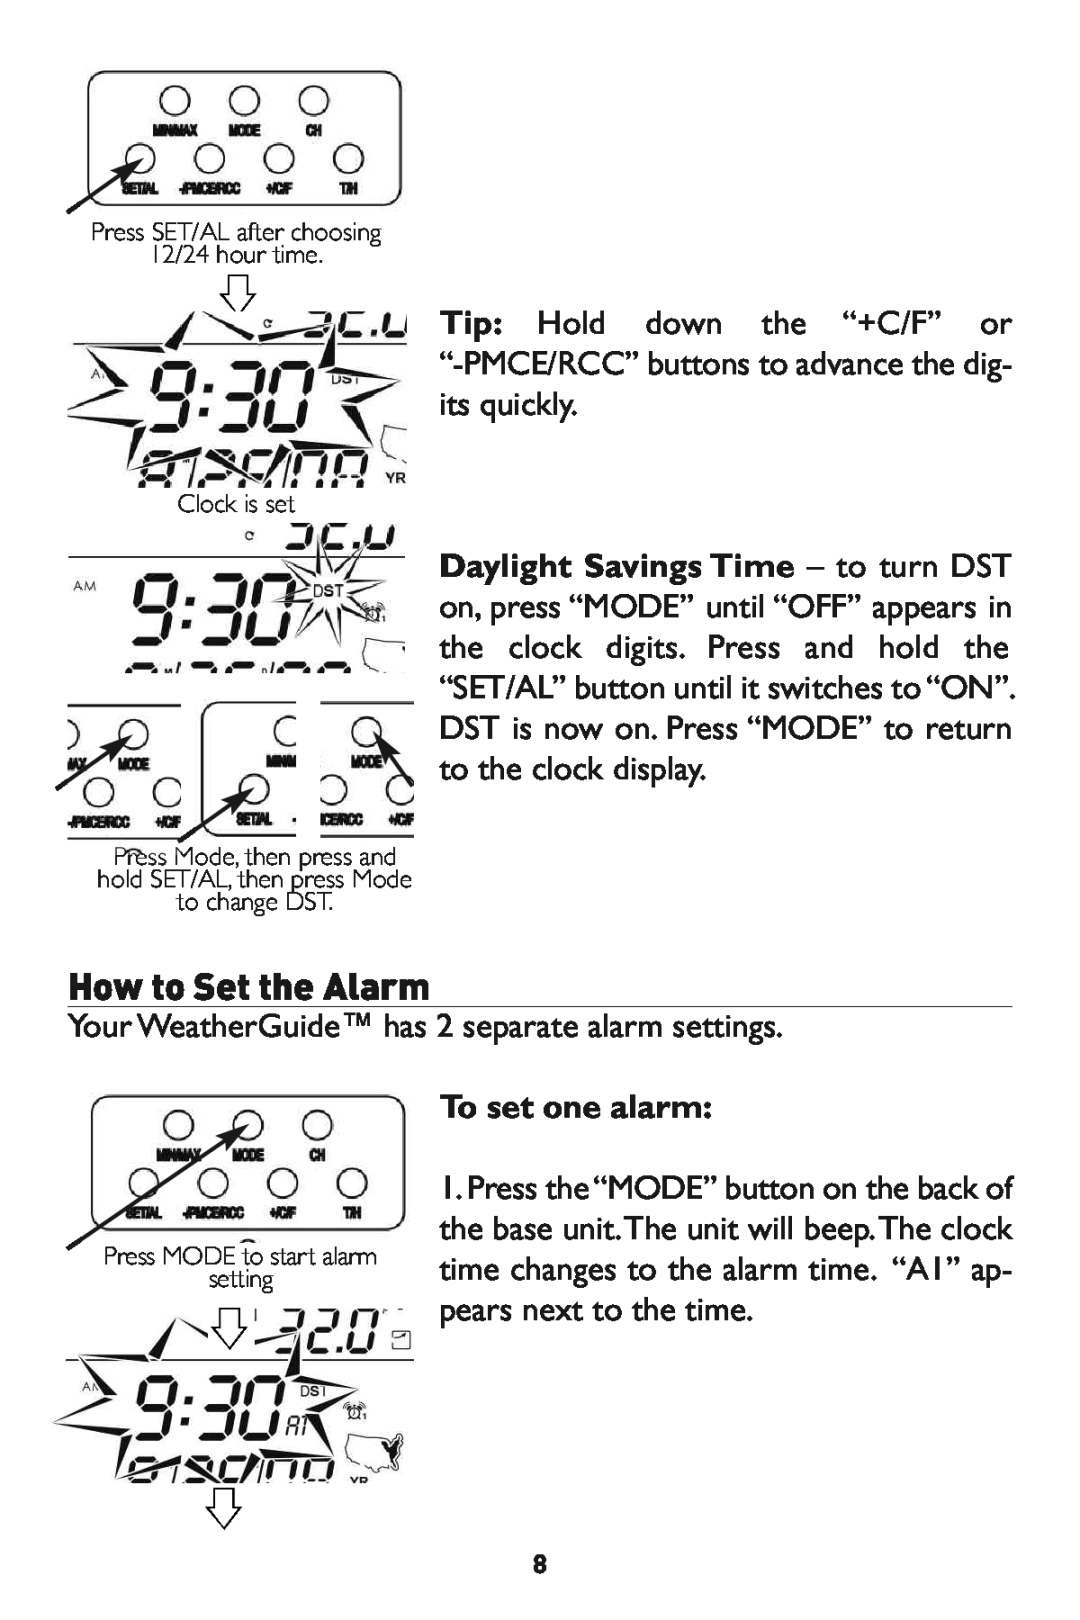 Taylor 1526 instruction manual How to Set theAlarm, Daylight Savings Time - to turn DST, Toset one alarm 